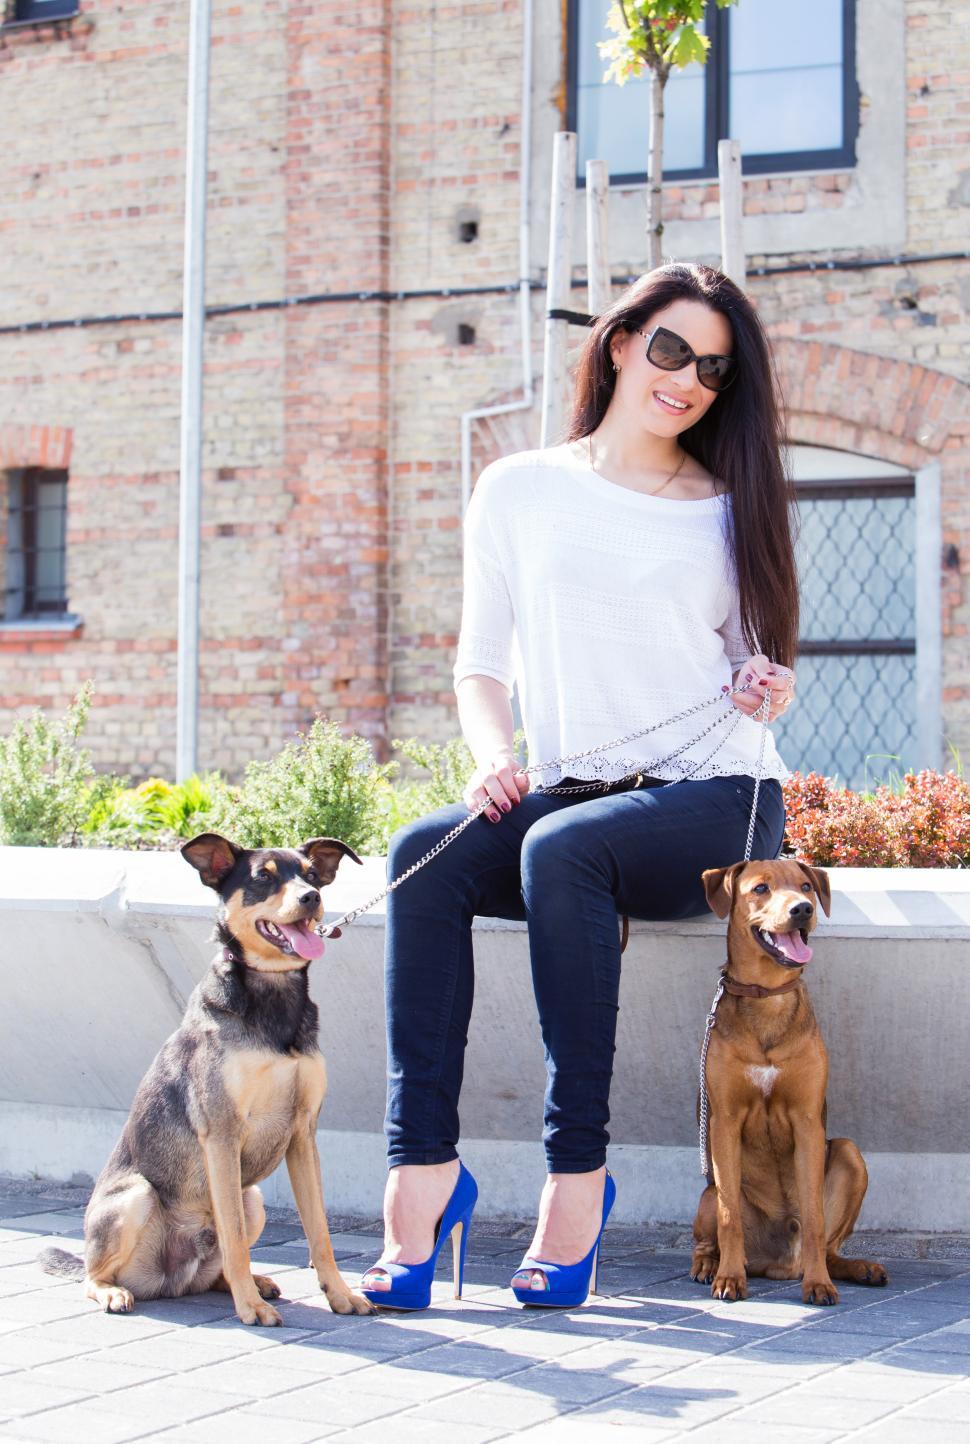 Download Free Stock Photo of Beautiful woman in city with dogs 